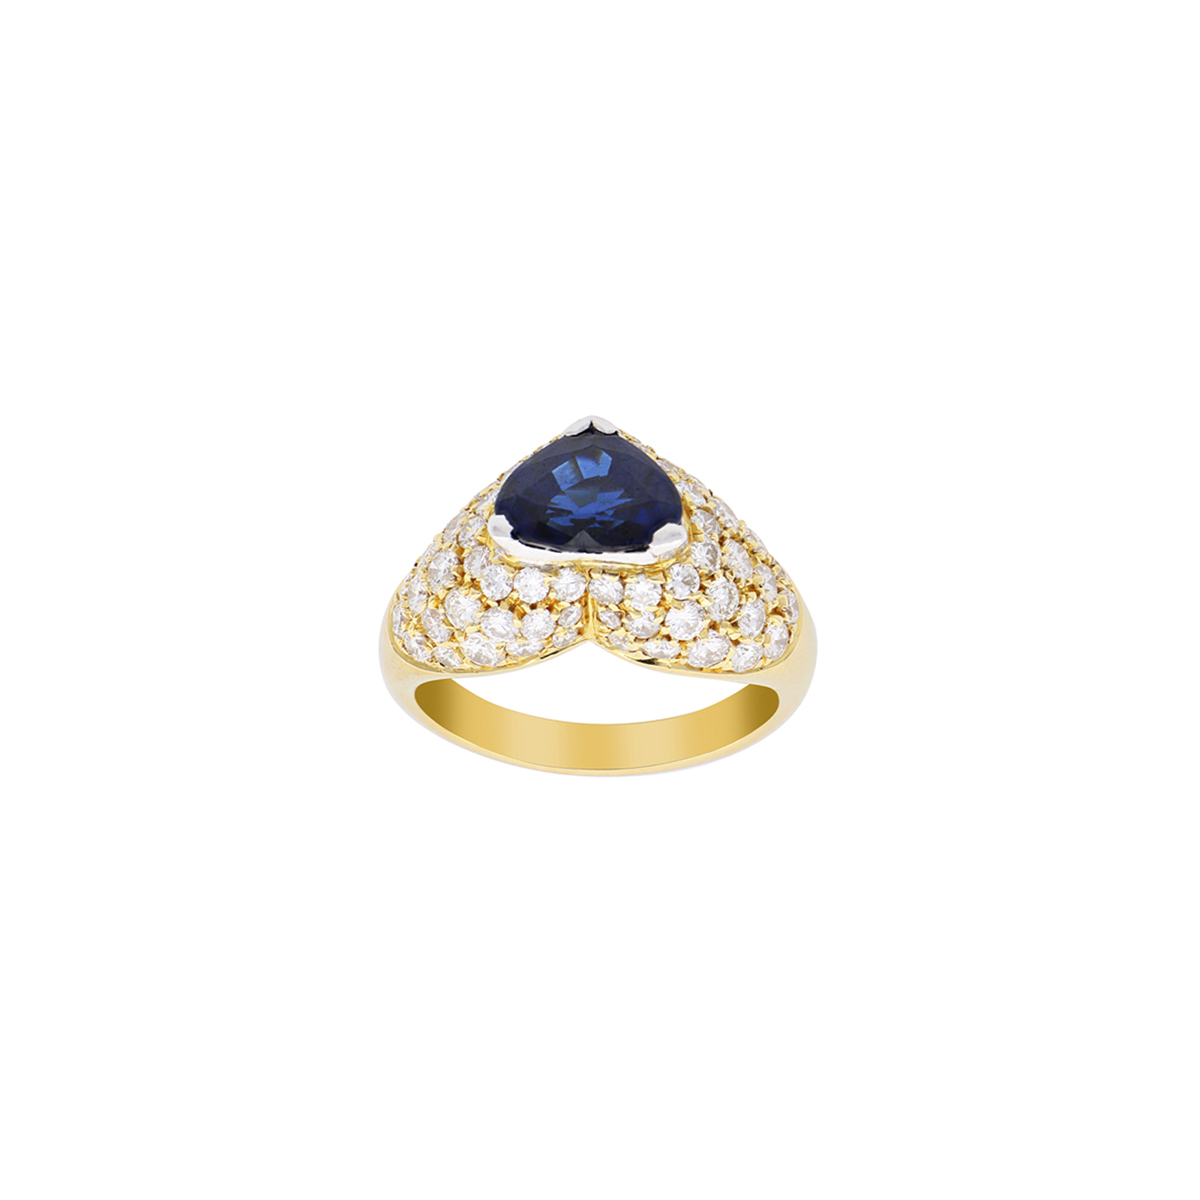 Heart-Cut Sapphire Ring with Diamonds